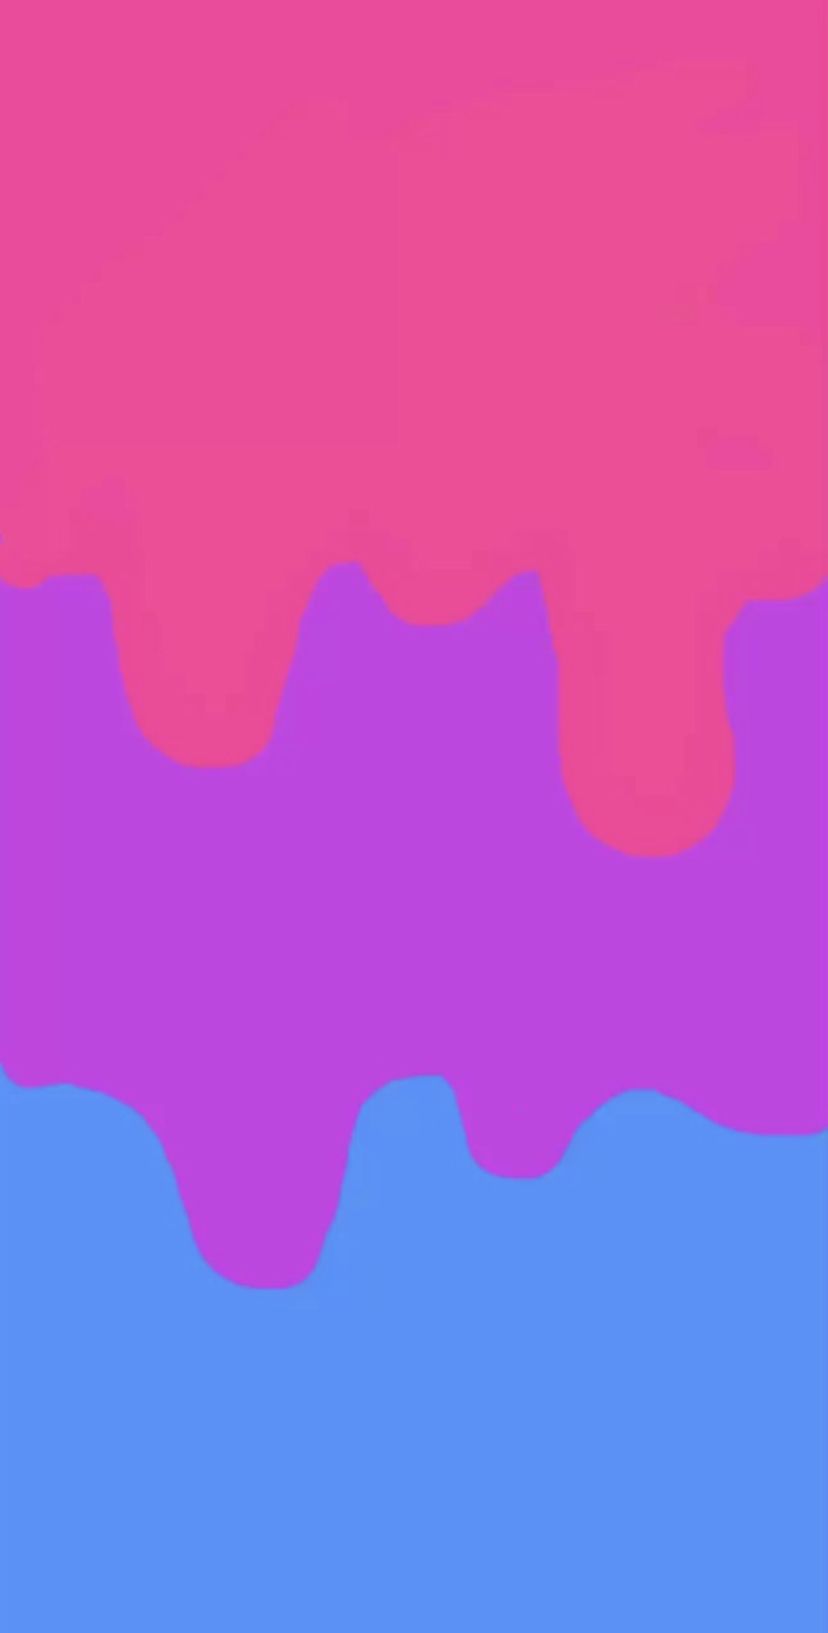 A colorful abstract painting with pink, purple, and blue hues. - Bisexual